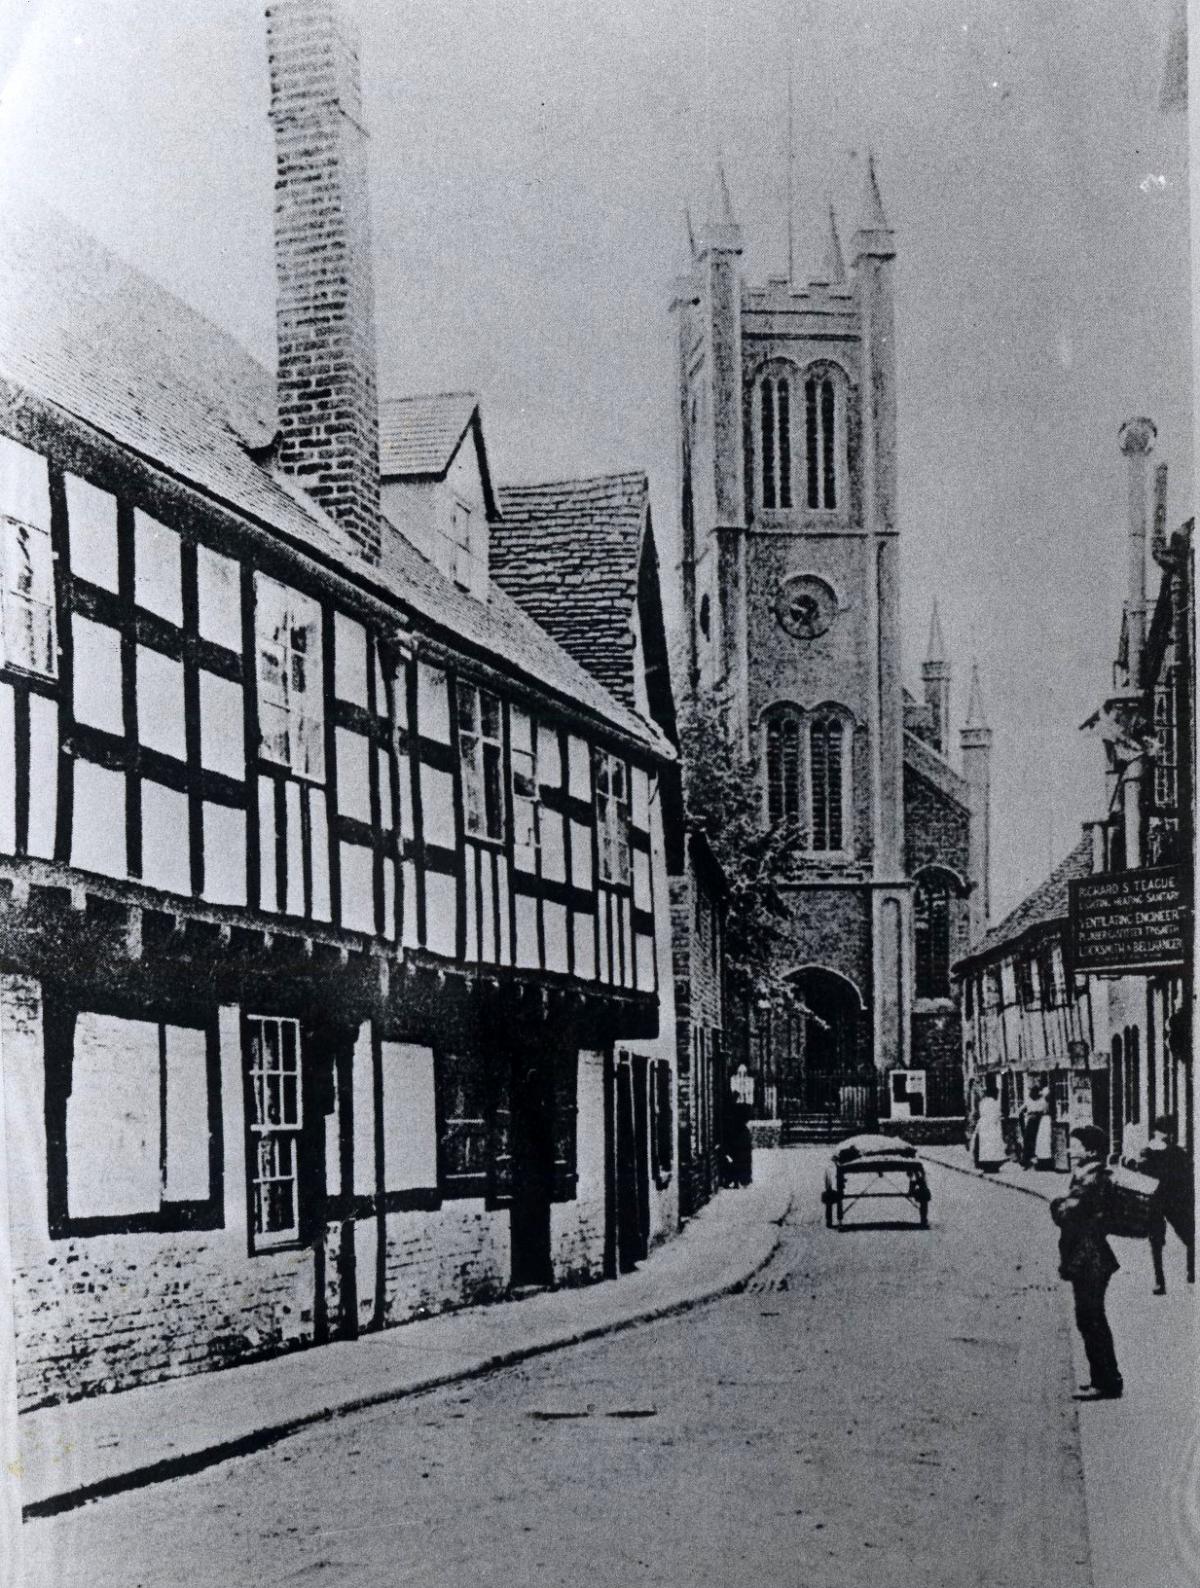 Vanished Worcester. A Victorian view of St Peter’s Street, Worcester, with the St Peter’s Church as its centrepiece